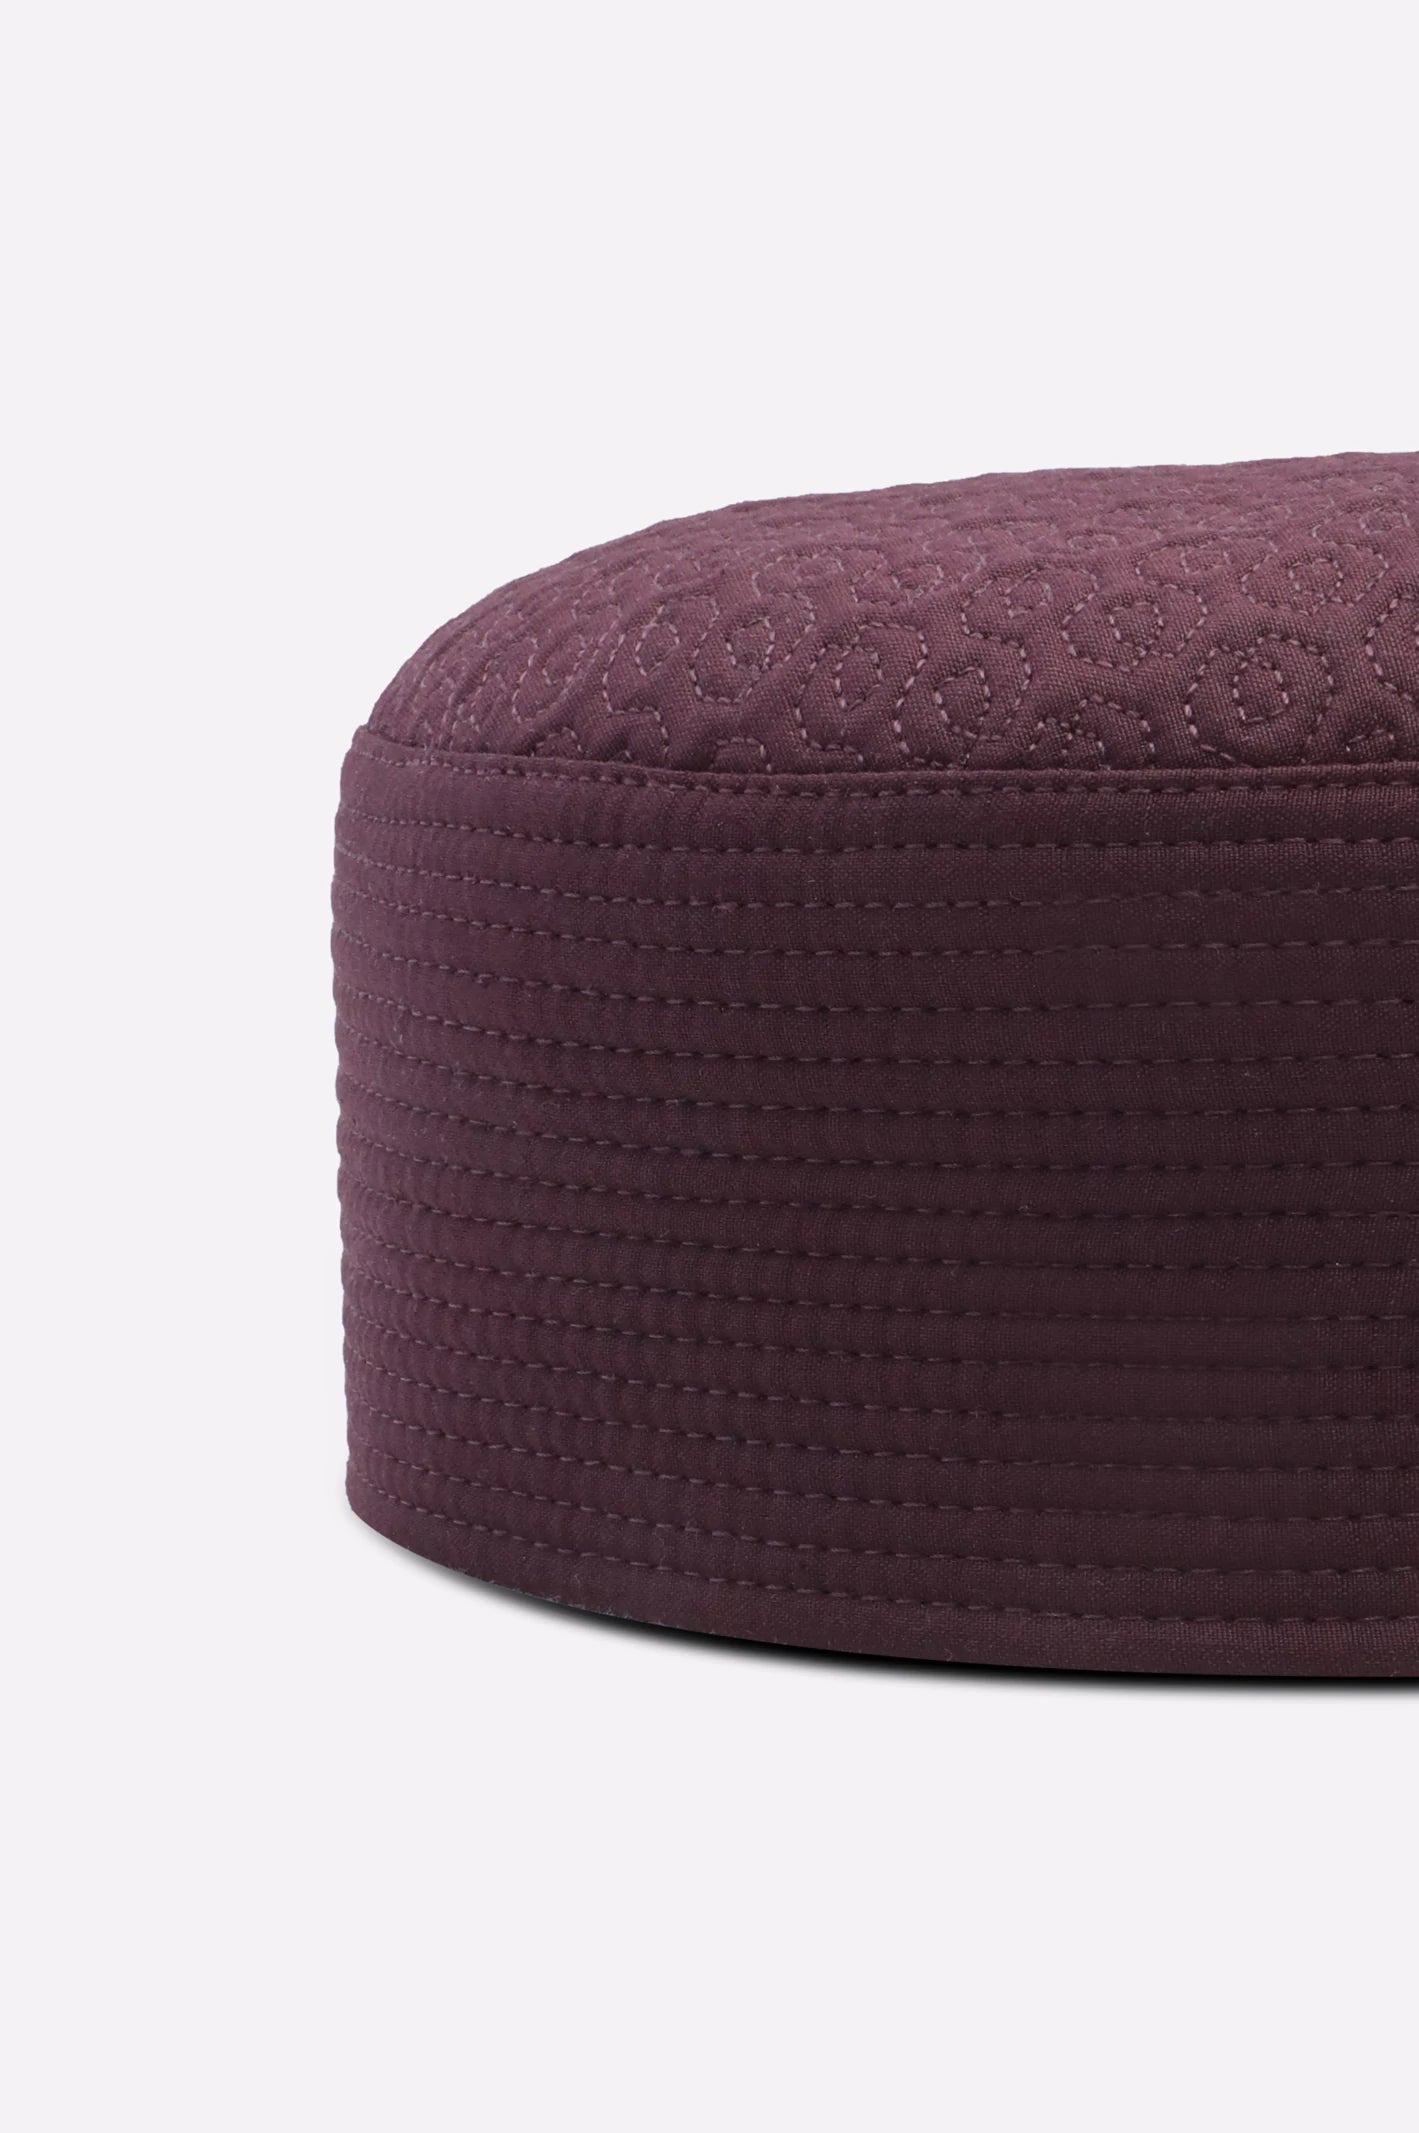 Maroon Caps For Men From Diners